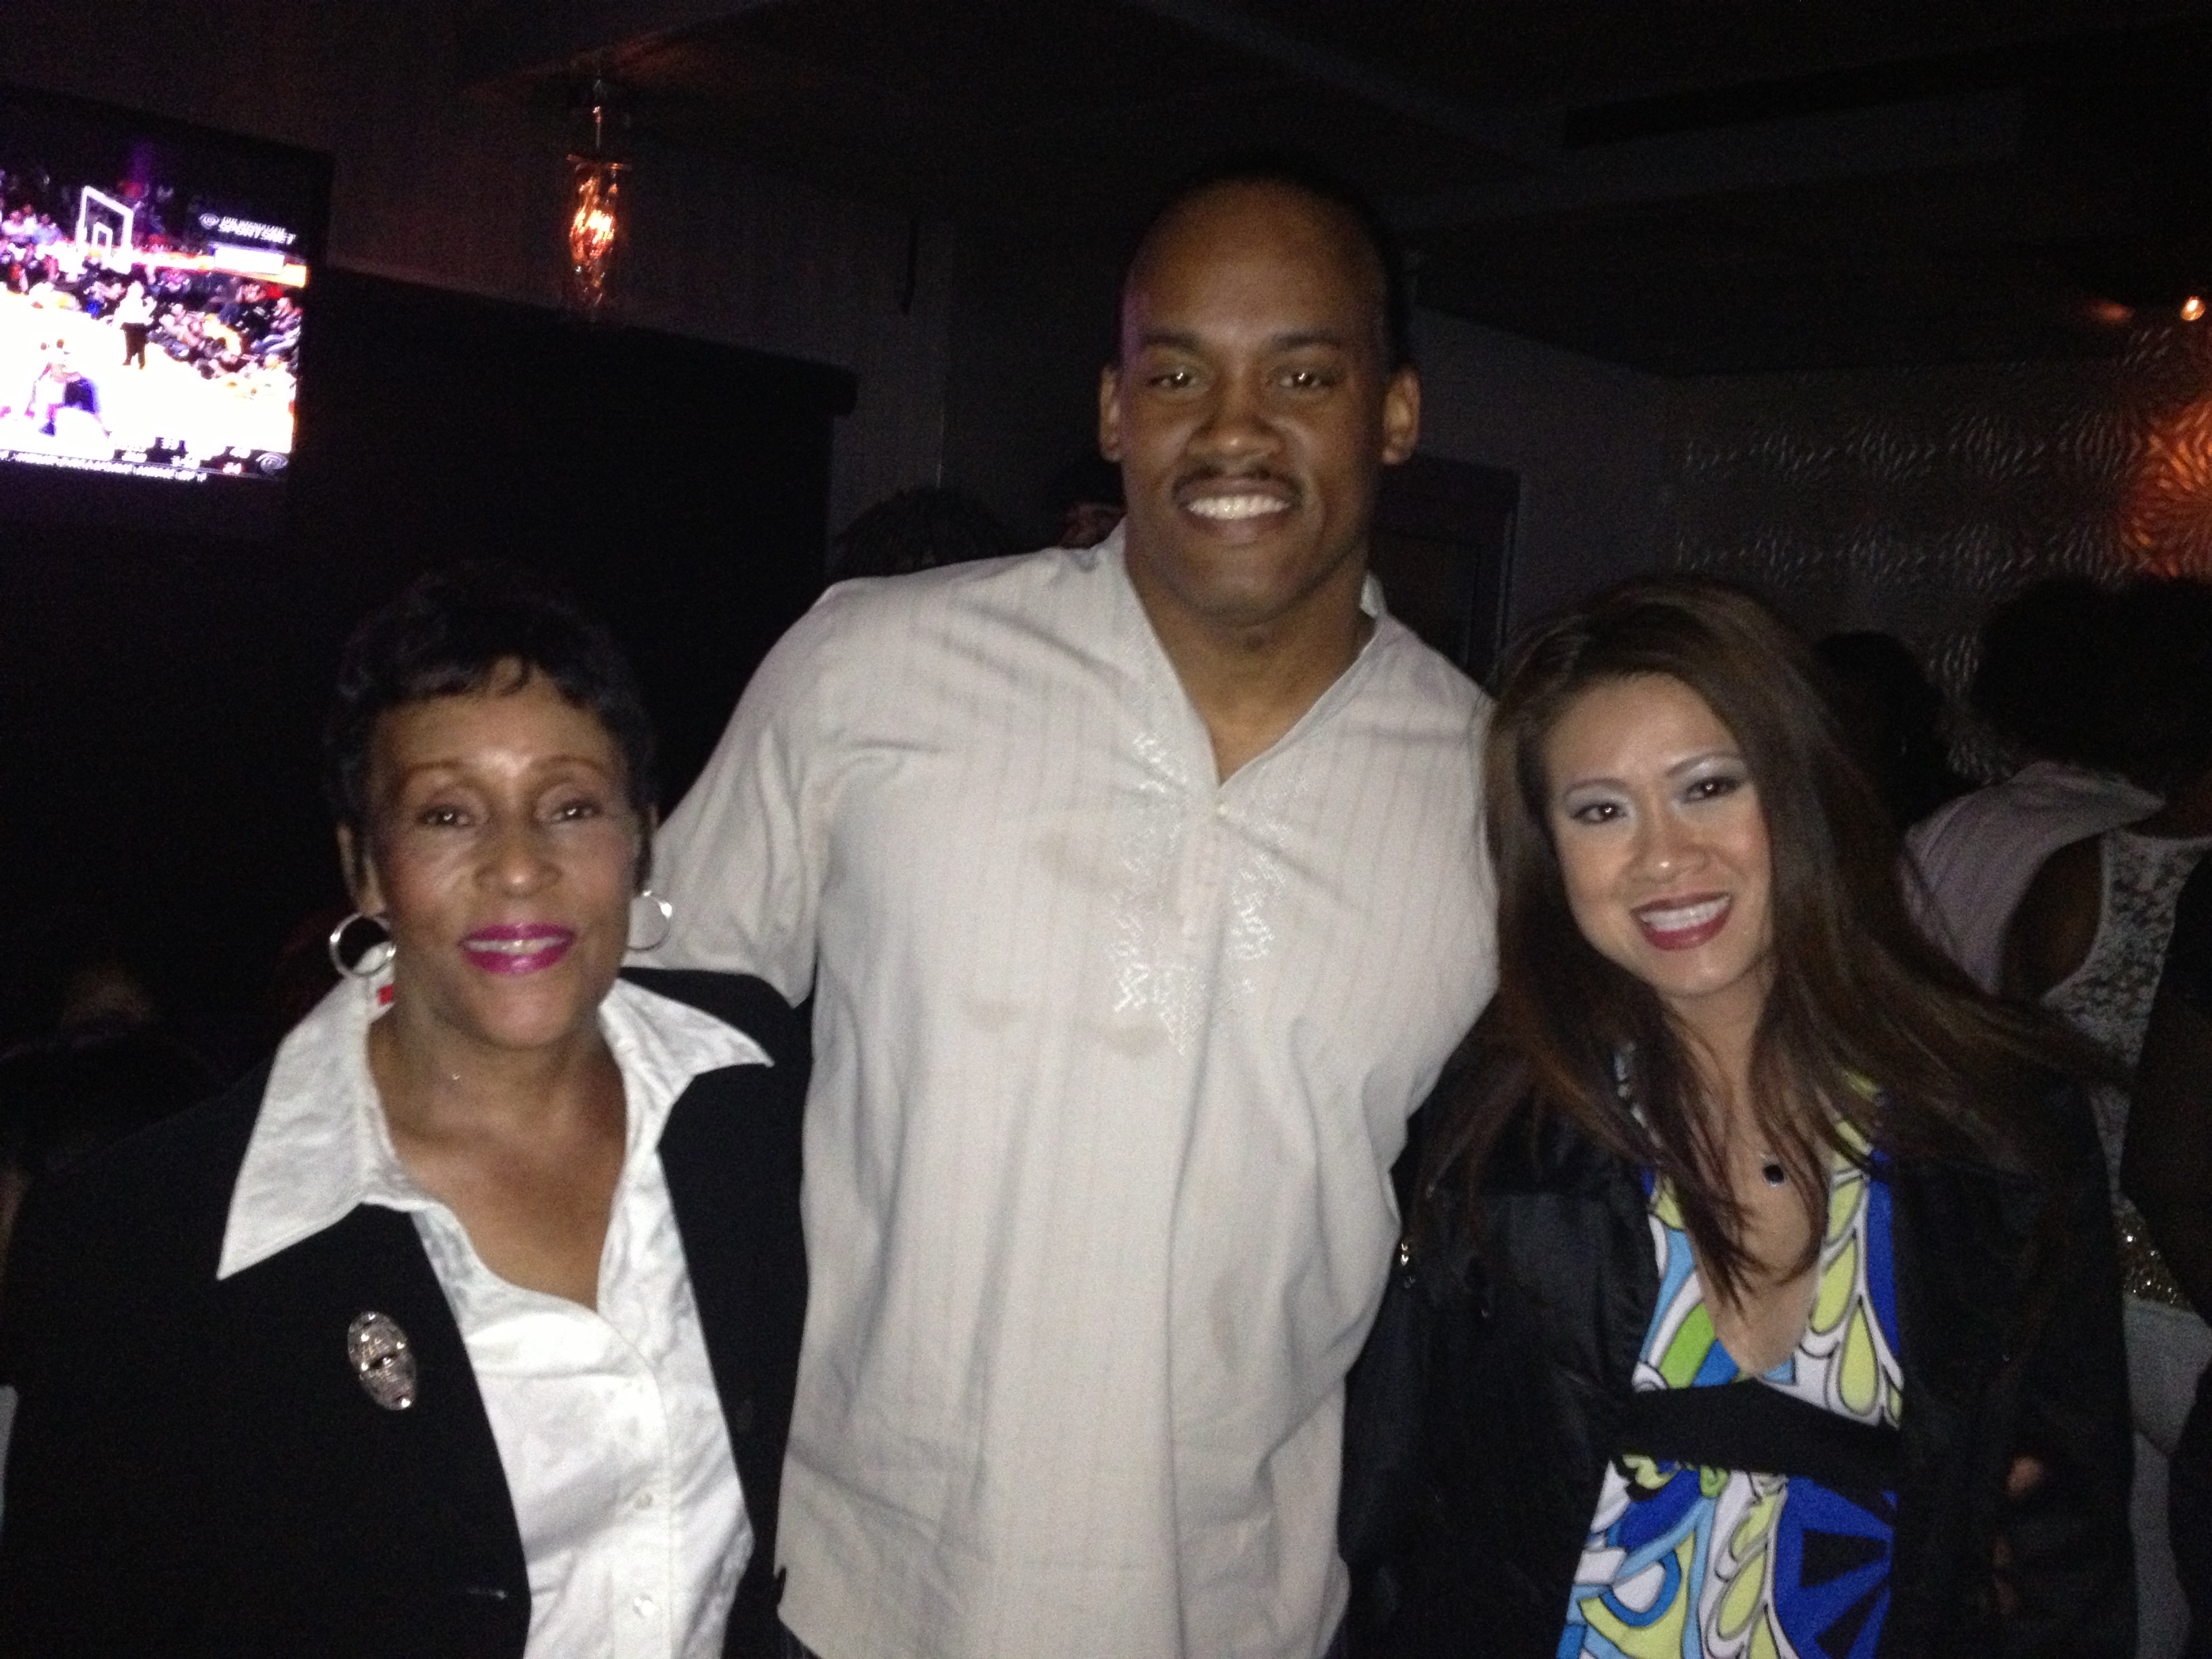 Director/Producer Greg Carter with Actress Junie Hoang and Publicist Lynn Jeter at Cafe Entourage for Lynn's Winter White Birthday Party on 1/25/2013